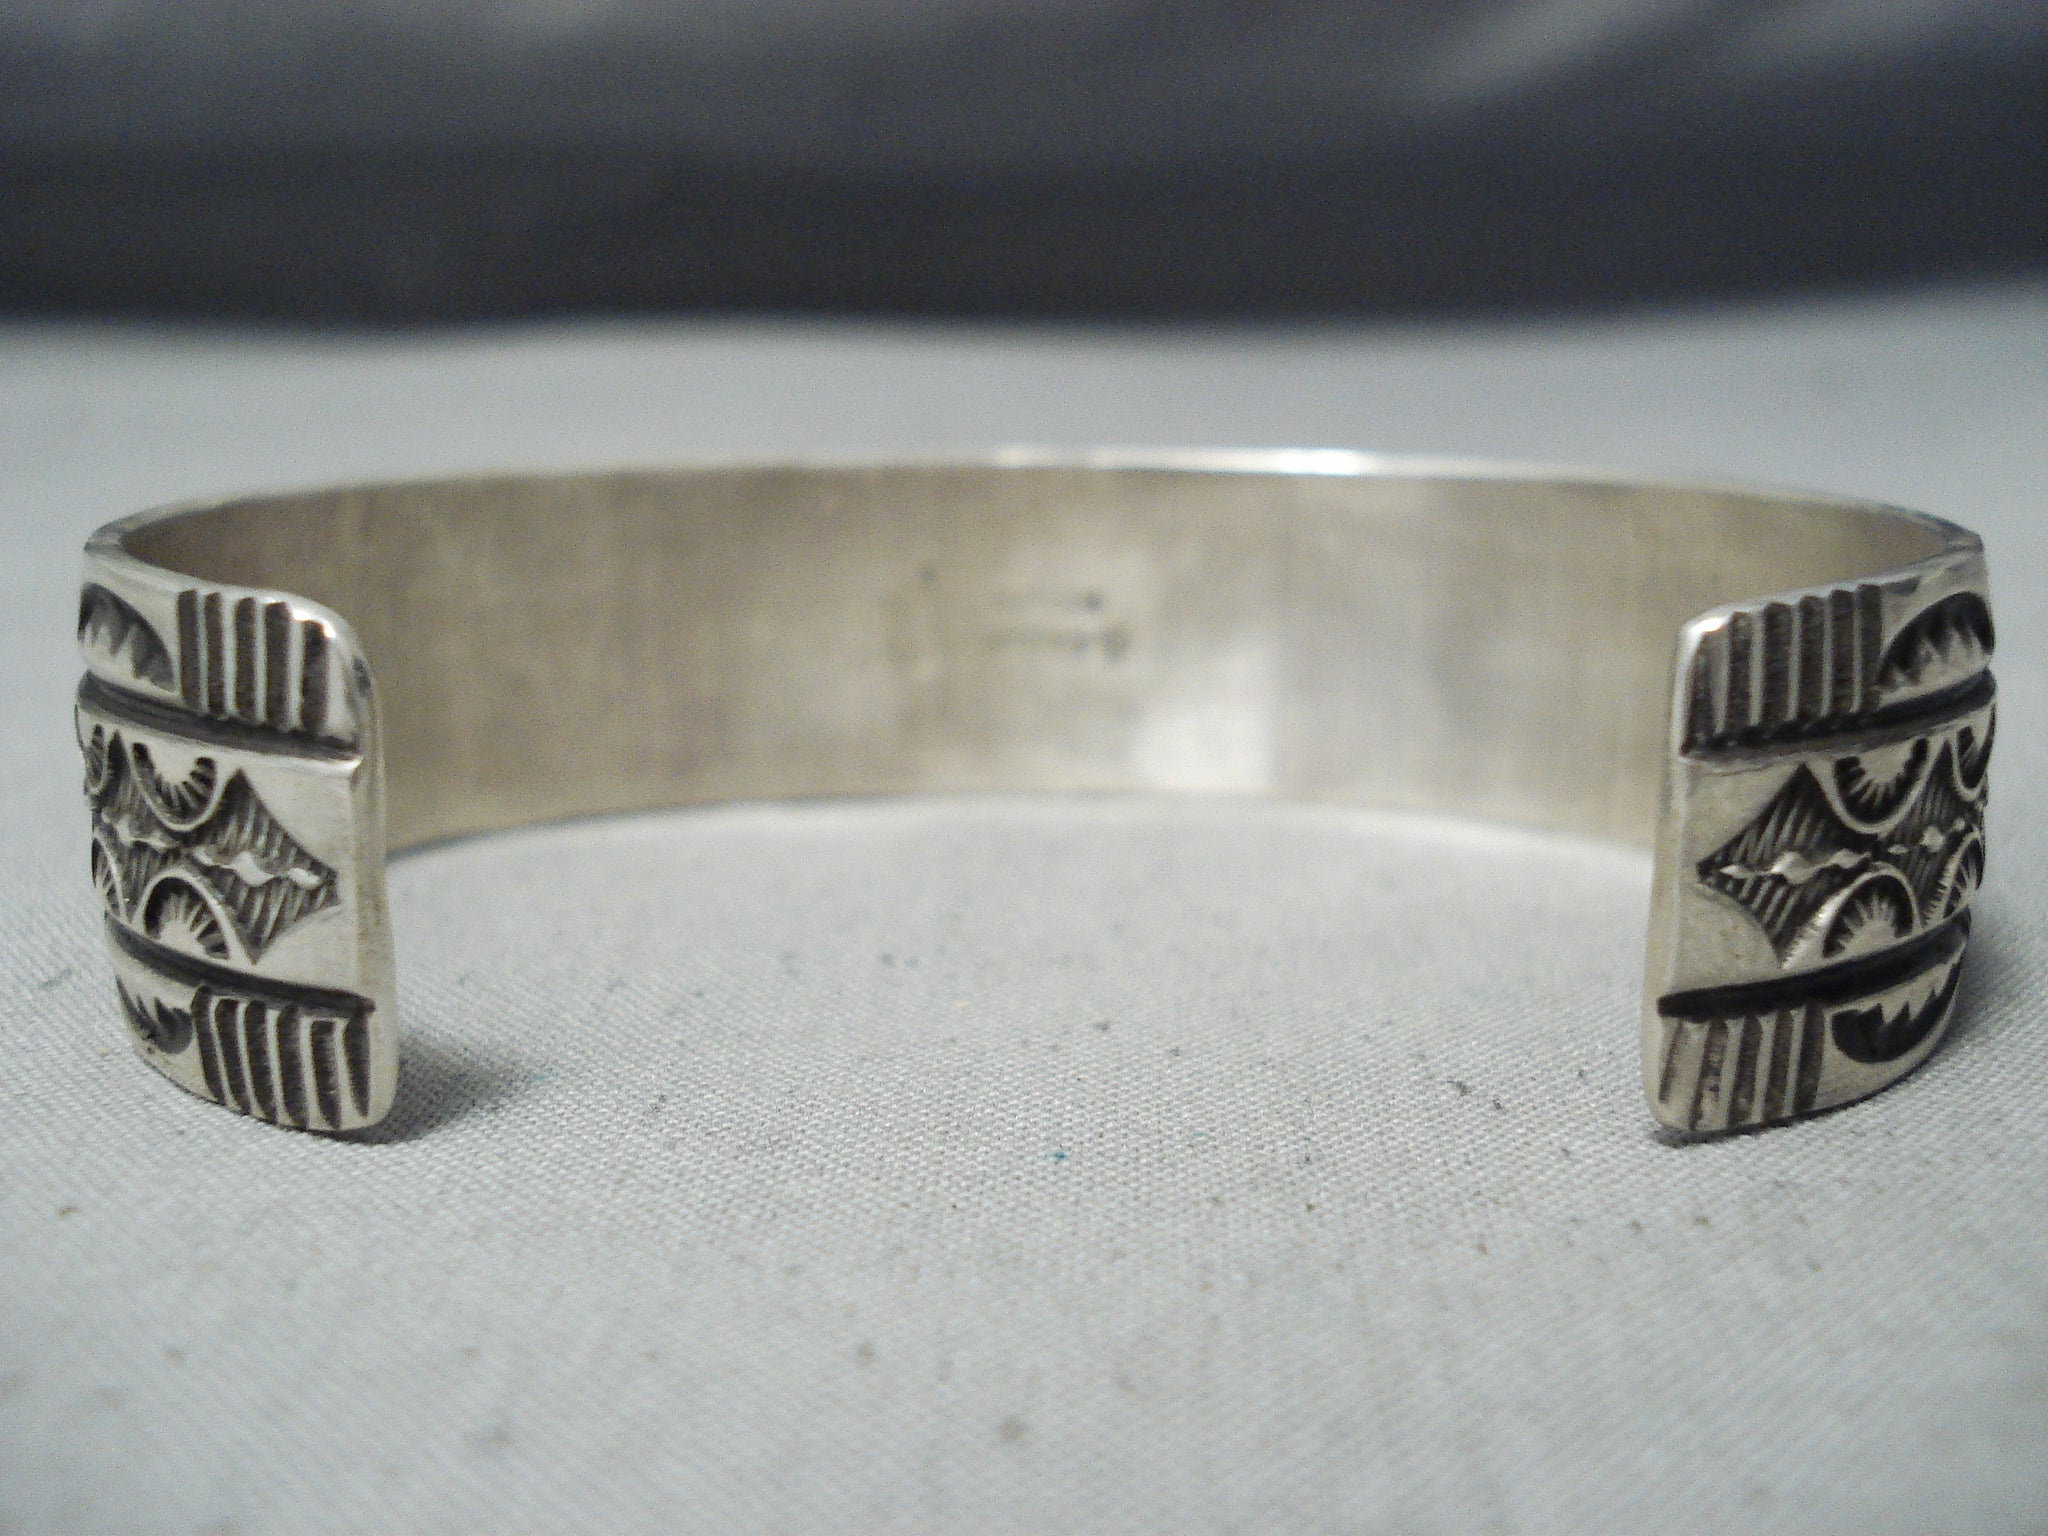 Native American Silver Bellsold for 393.00, it's awesome!